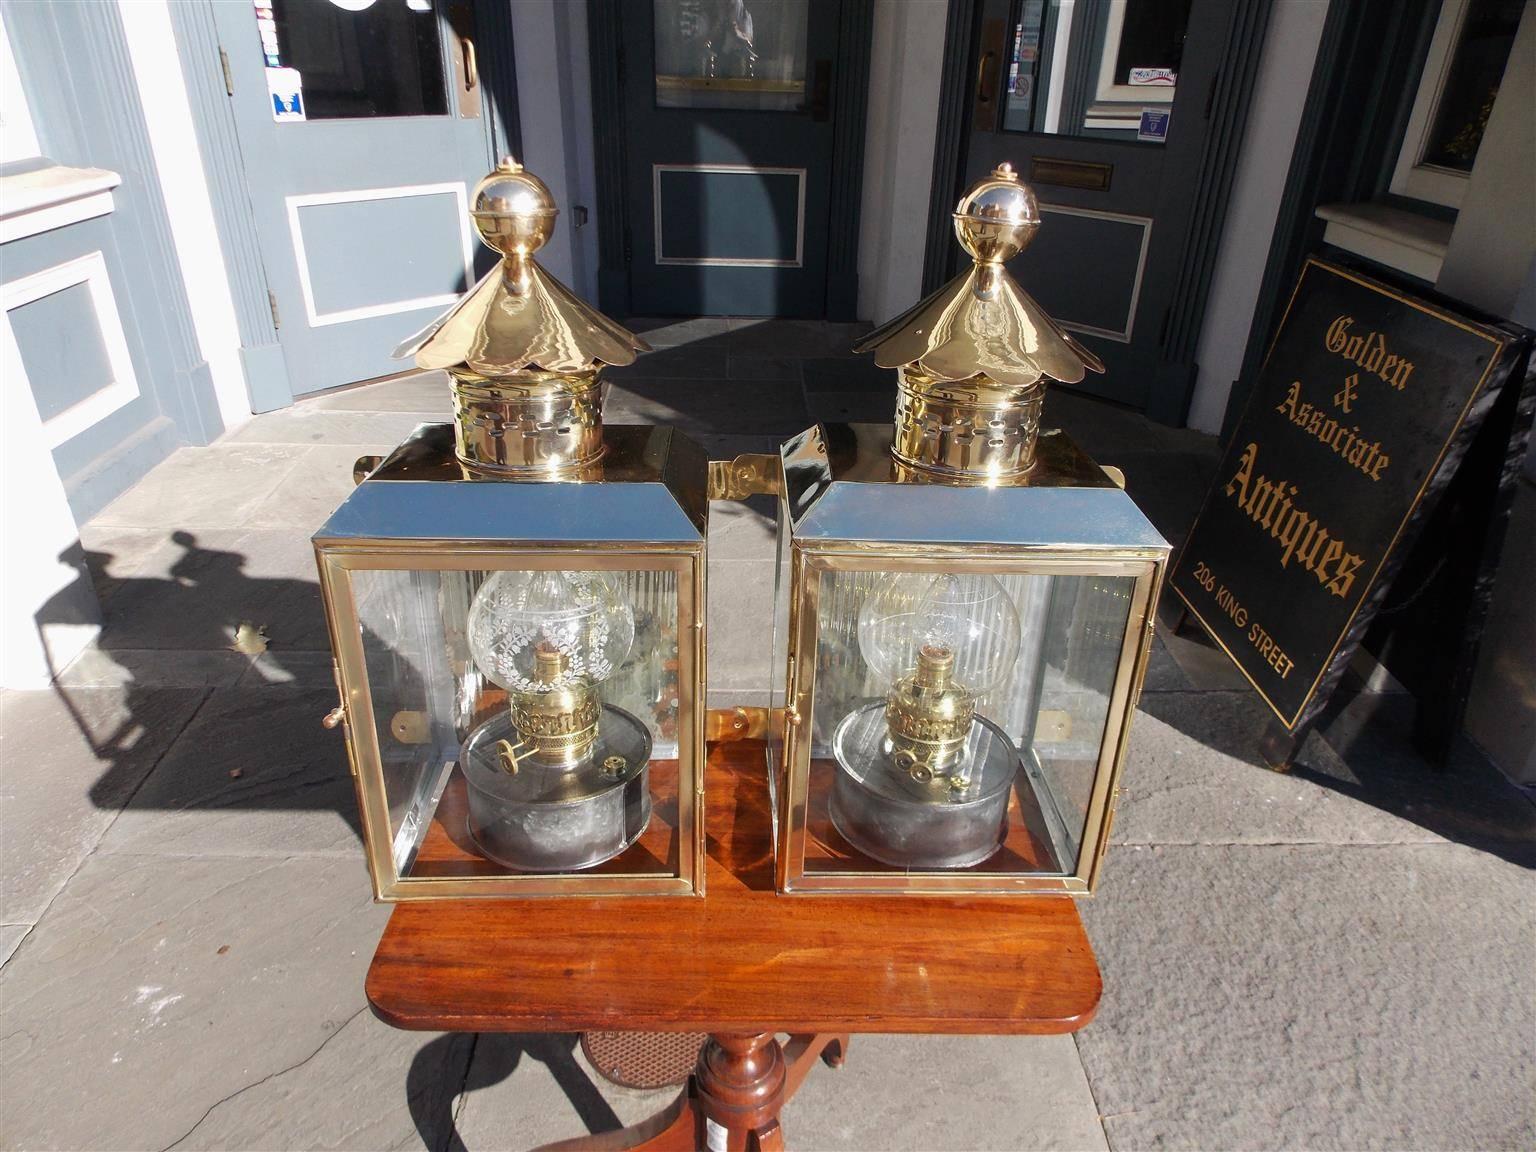 Cast Pair of American Brass and Polished Steel Wall Lanterns, Circa 1880